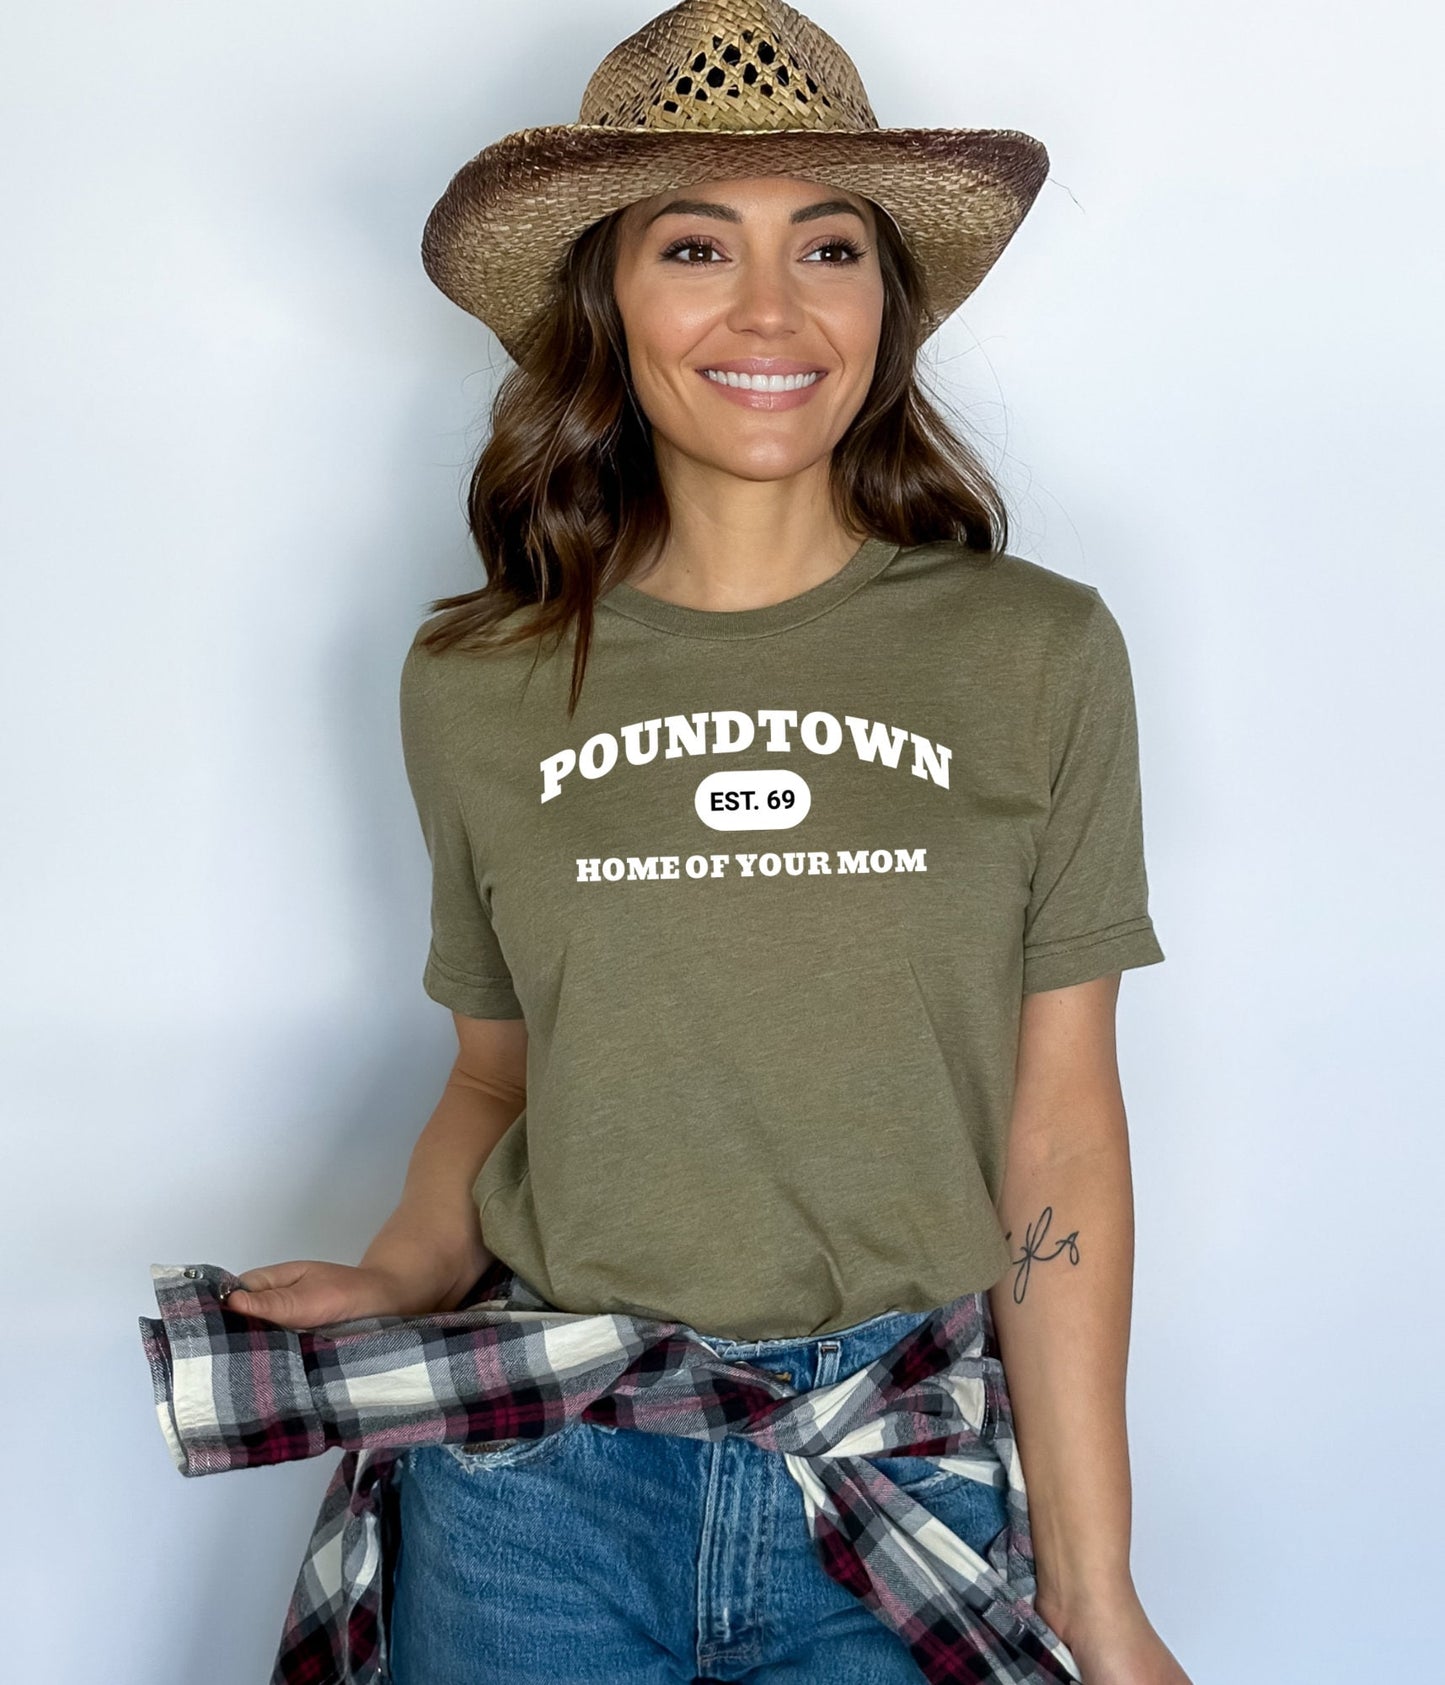 Pound town Sweatshirt, Poundtown Tee, Funny Crewneck, Crewneck Sweatshirt, Oversized Sweater, Comfy Sweater, Mothers Day Gift,Fall Sweater